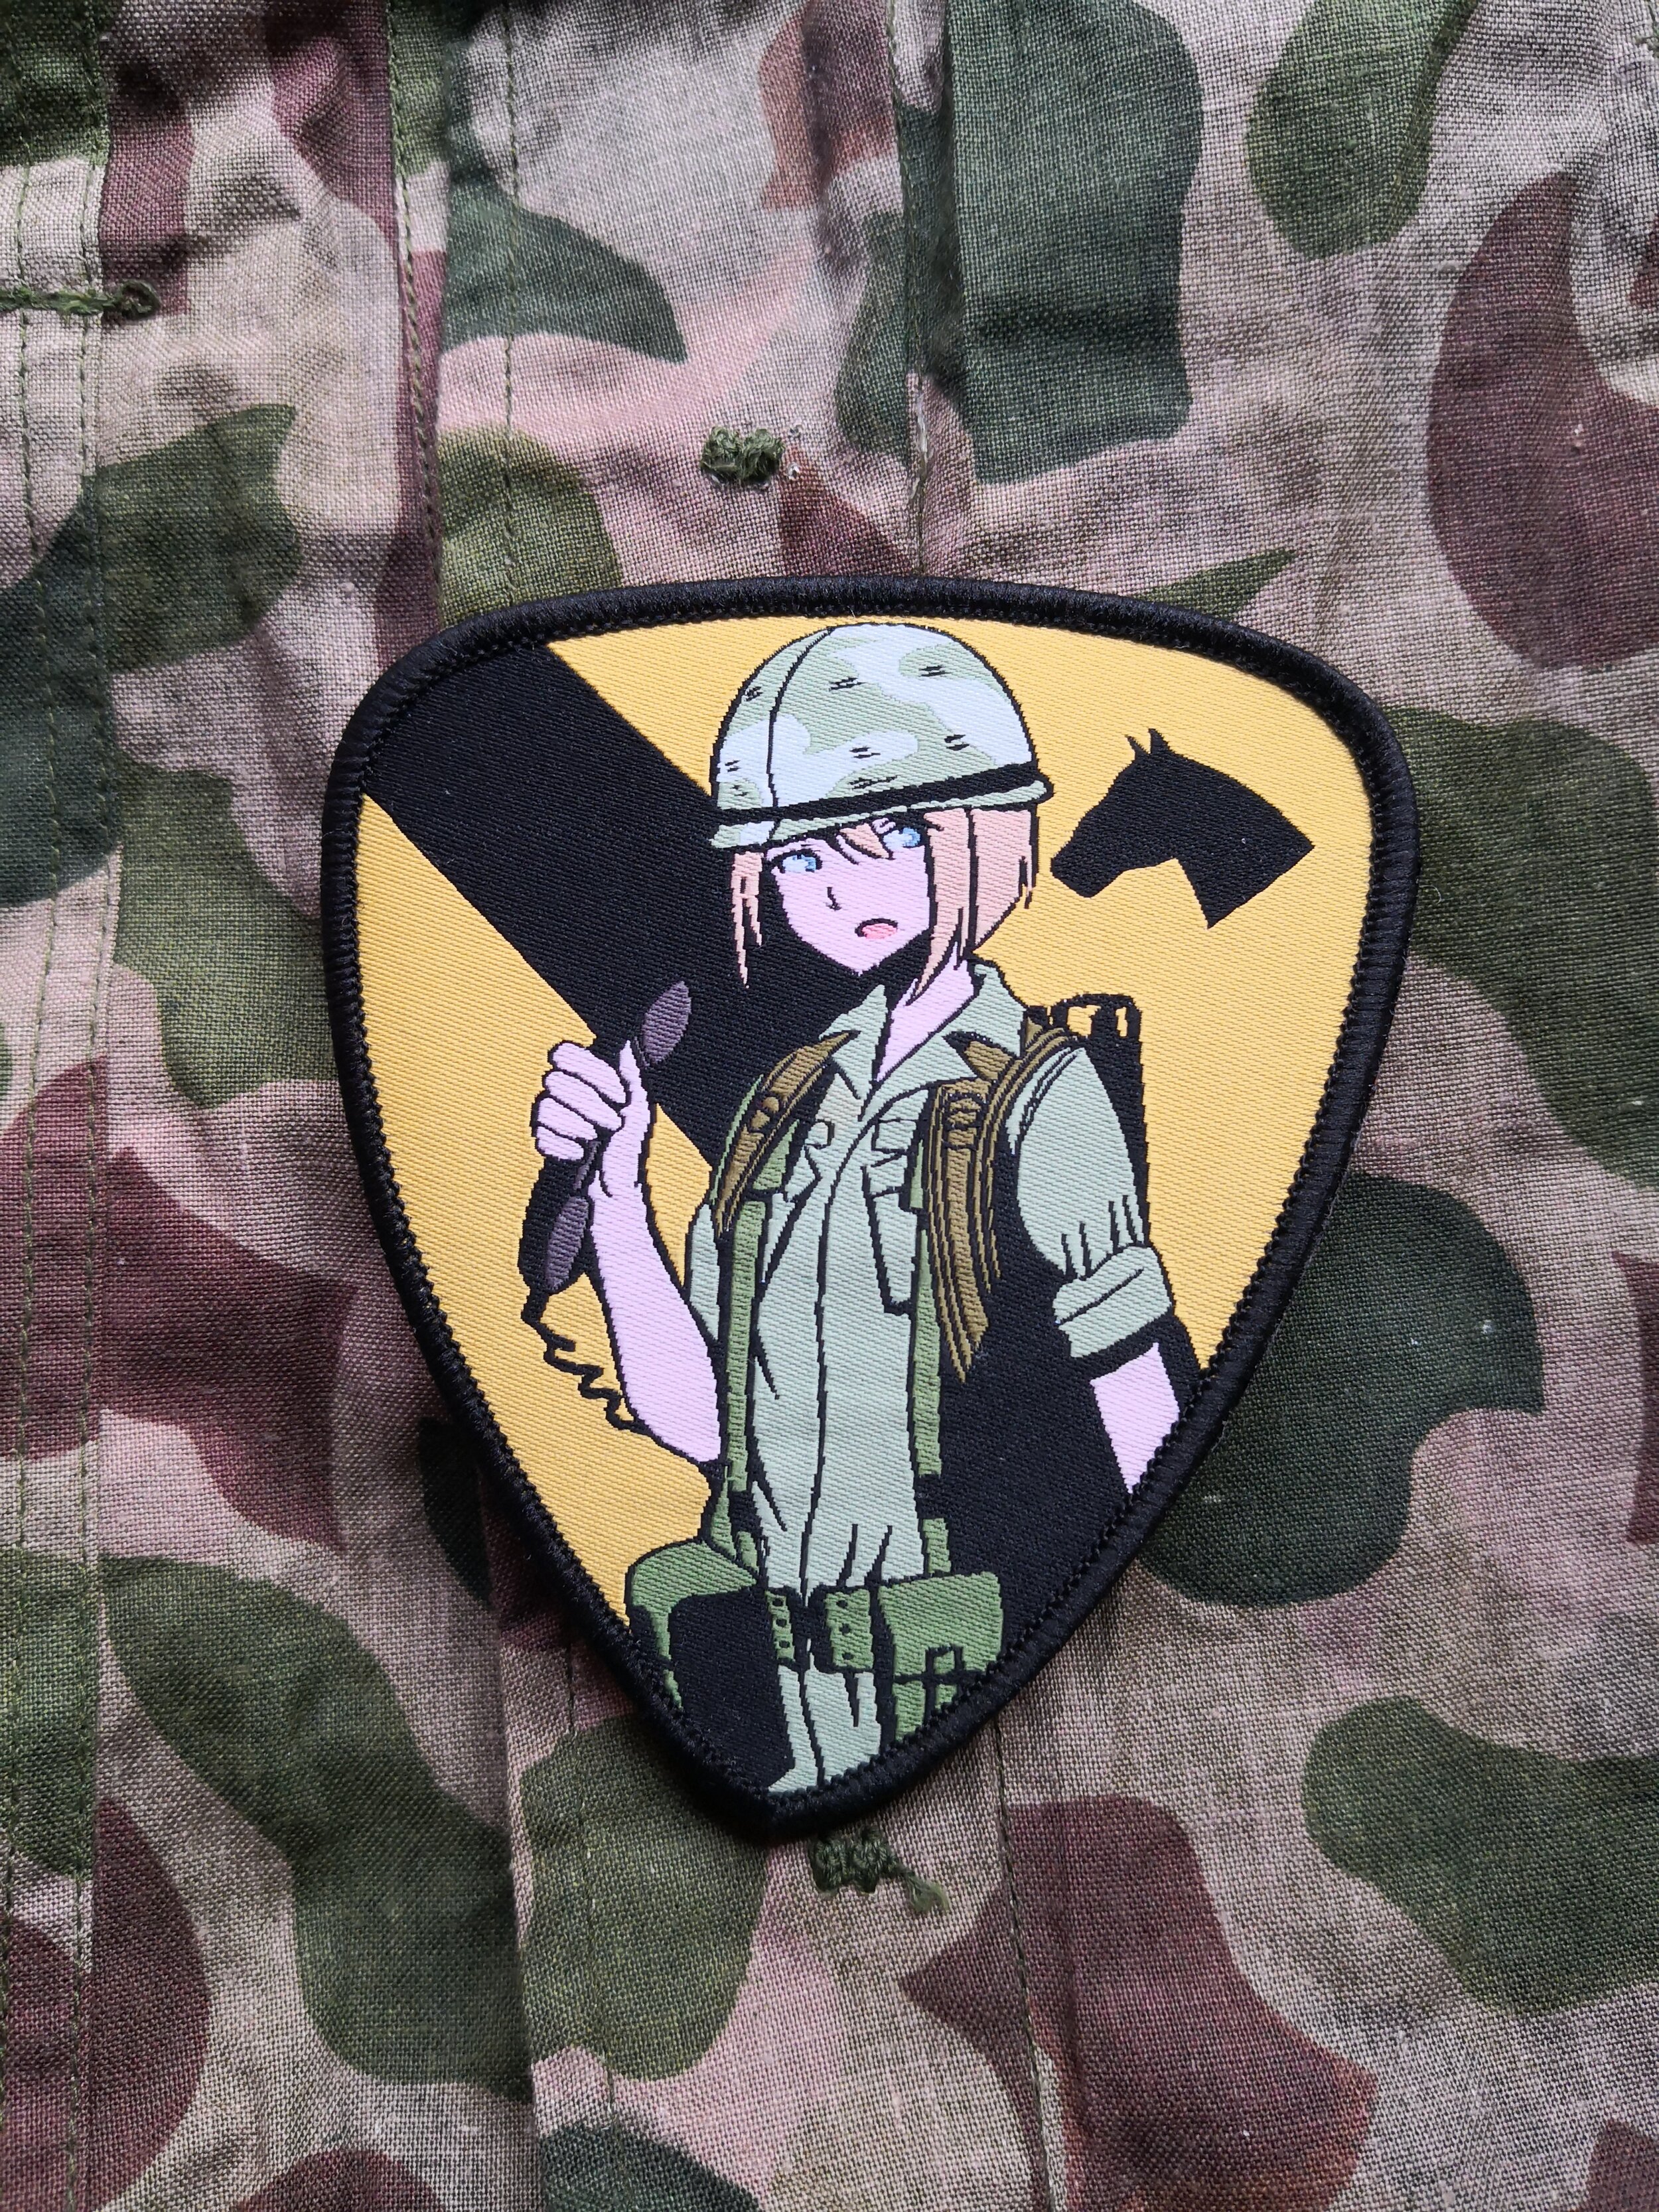 Amazoncom Anime Girl Eyes Embroidery Patch Military Tactical Morale Patch  Badges Emblem Applique Hook Patches for Clothes Backpack Accessories   Arts Crafts  Sewing